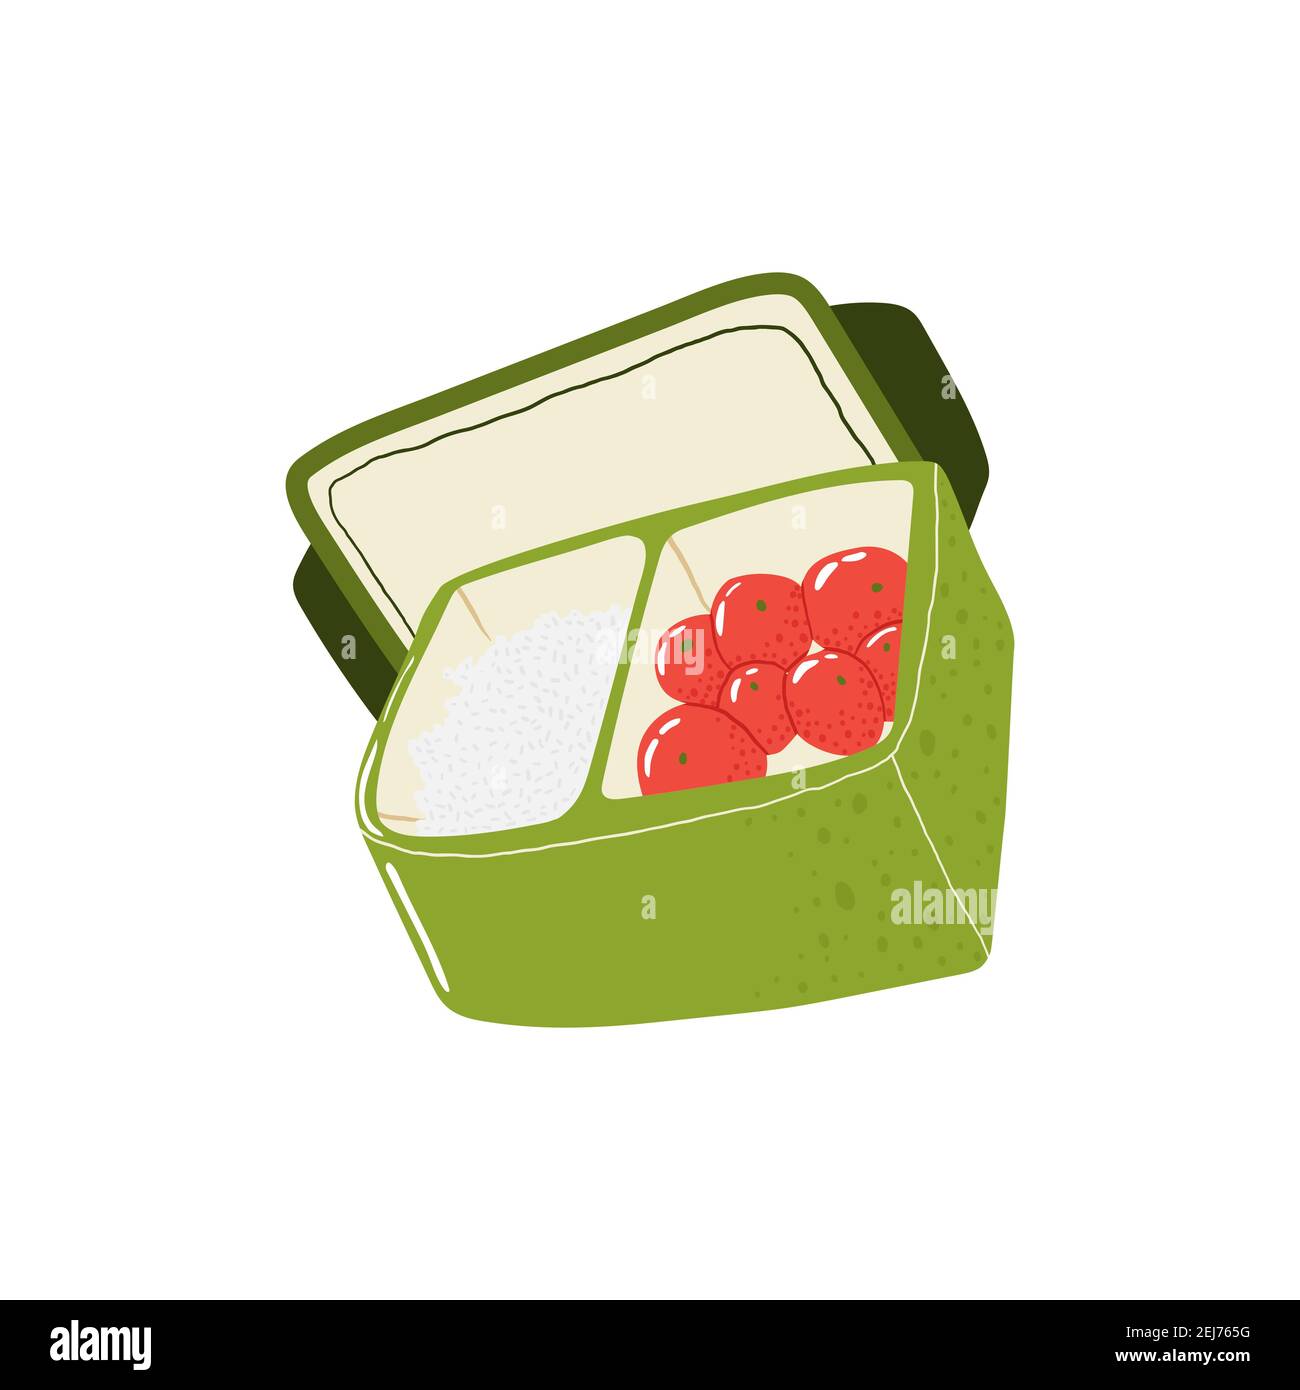 Reusable lunchbox. Simple icon of reusable container for food. Eco friendly packaging. Zero waste lifestyle concept. Vector illustration in flat carto Stock Vector